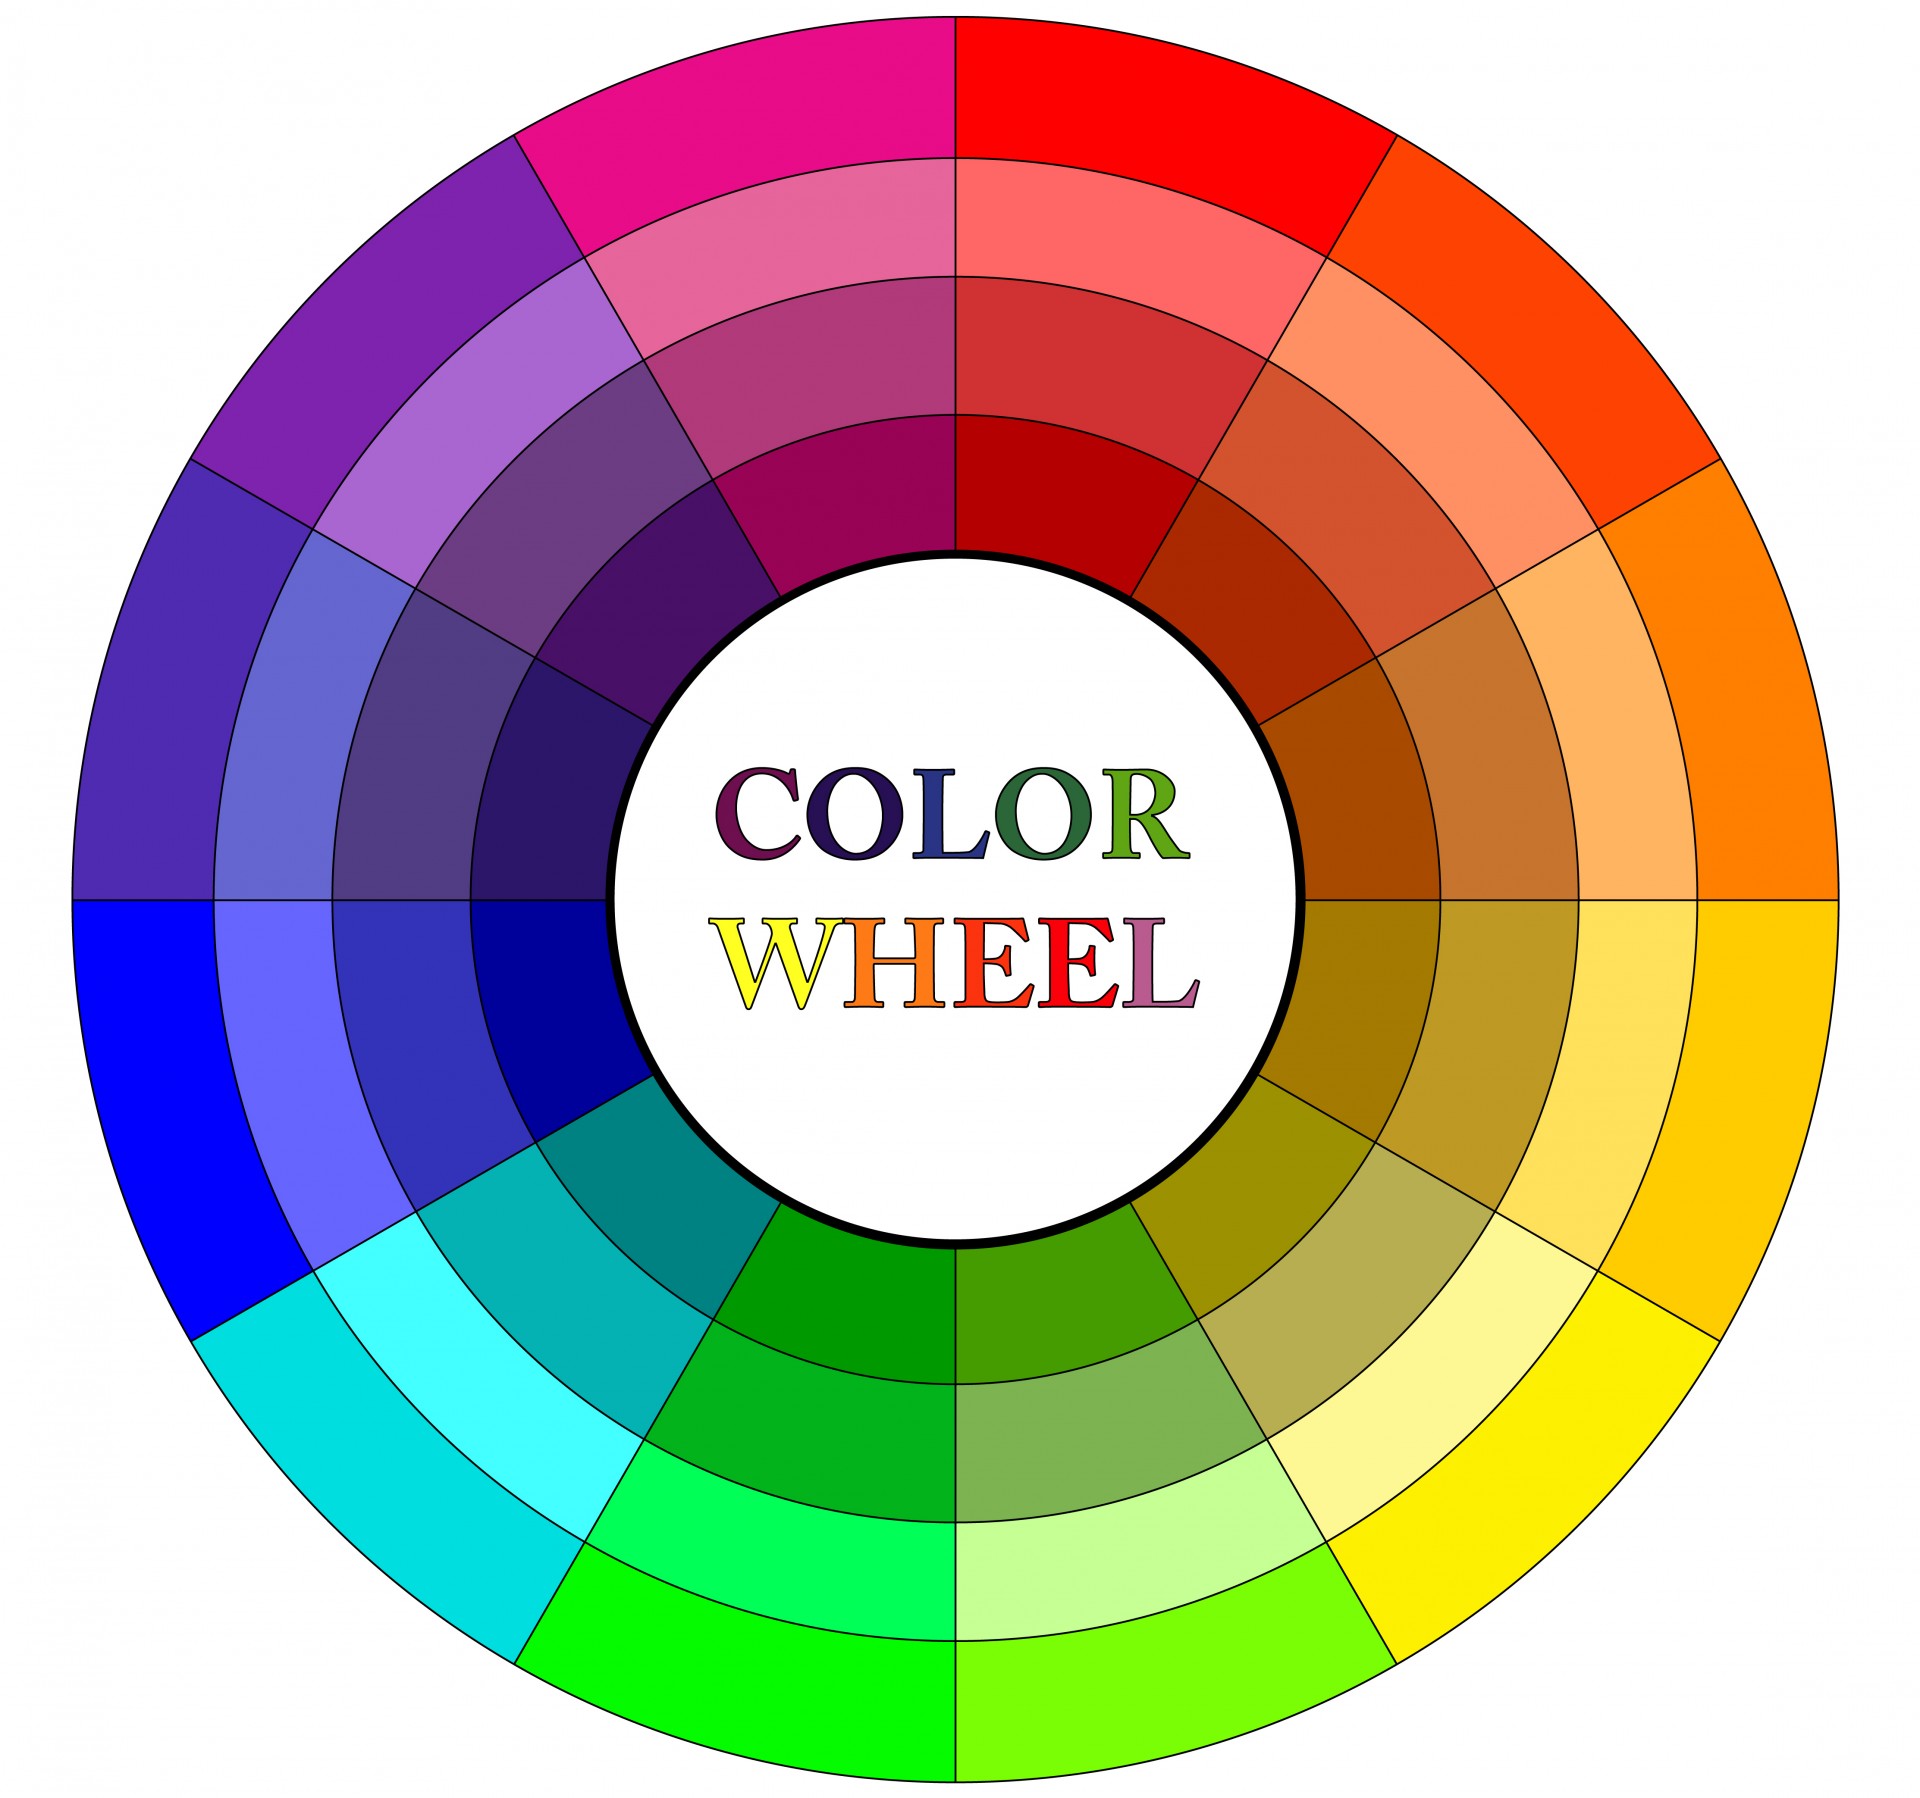 A colour wheel, showing a transition from red, to orange, to yellow, to green, to blue, to purple and back to red.